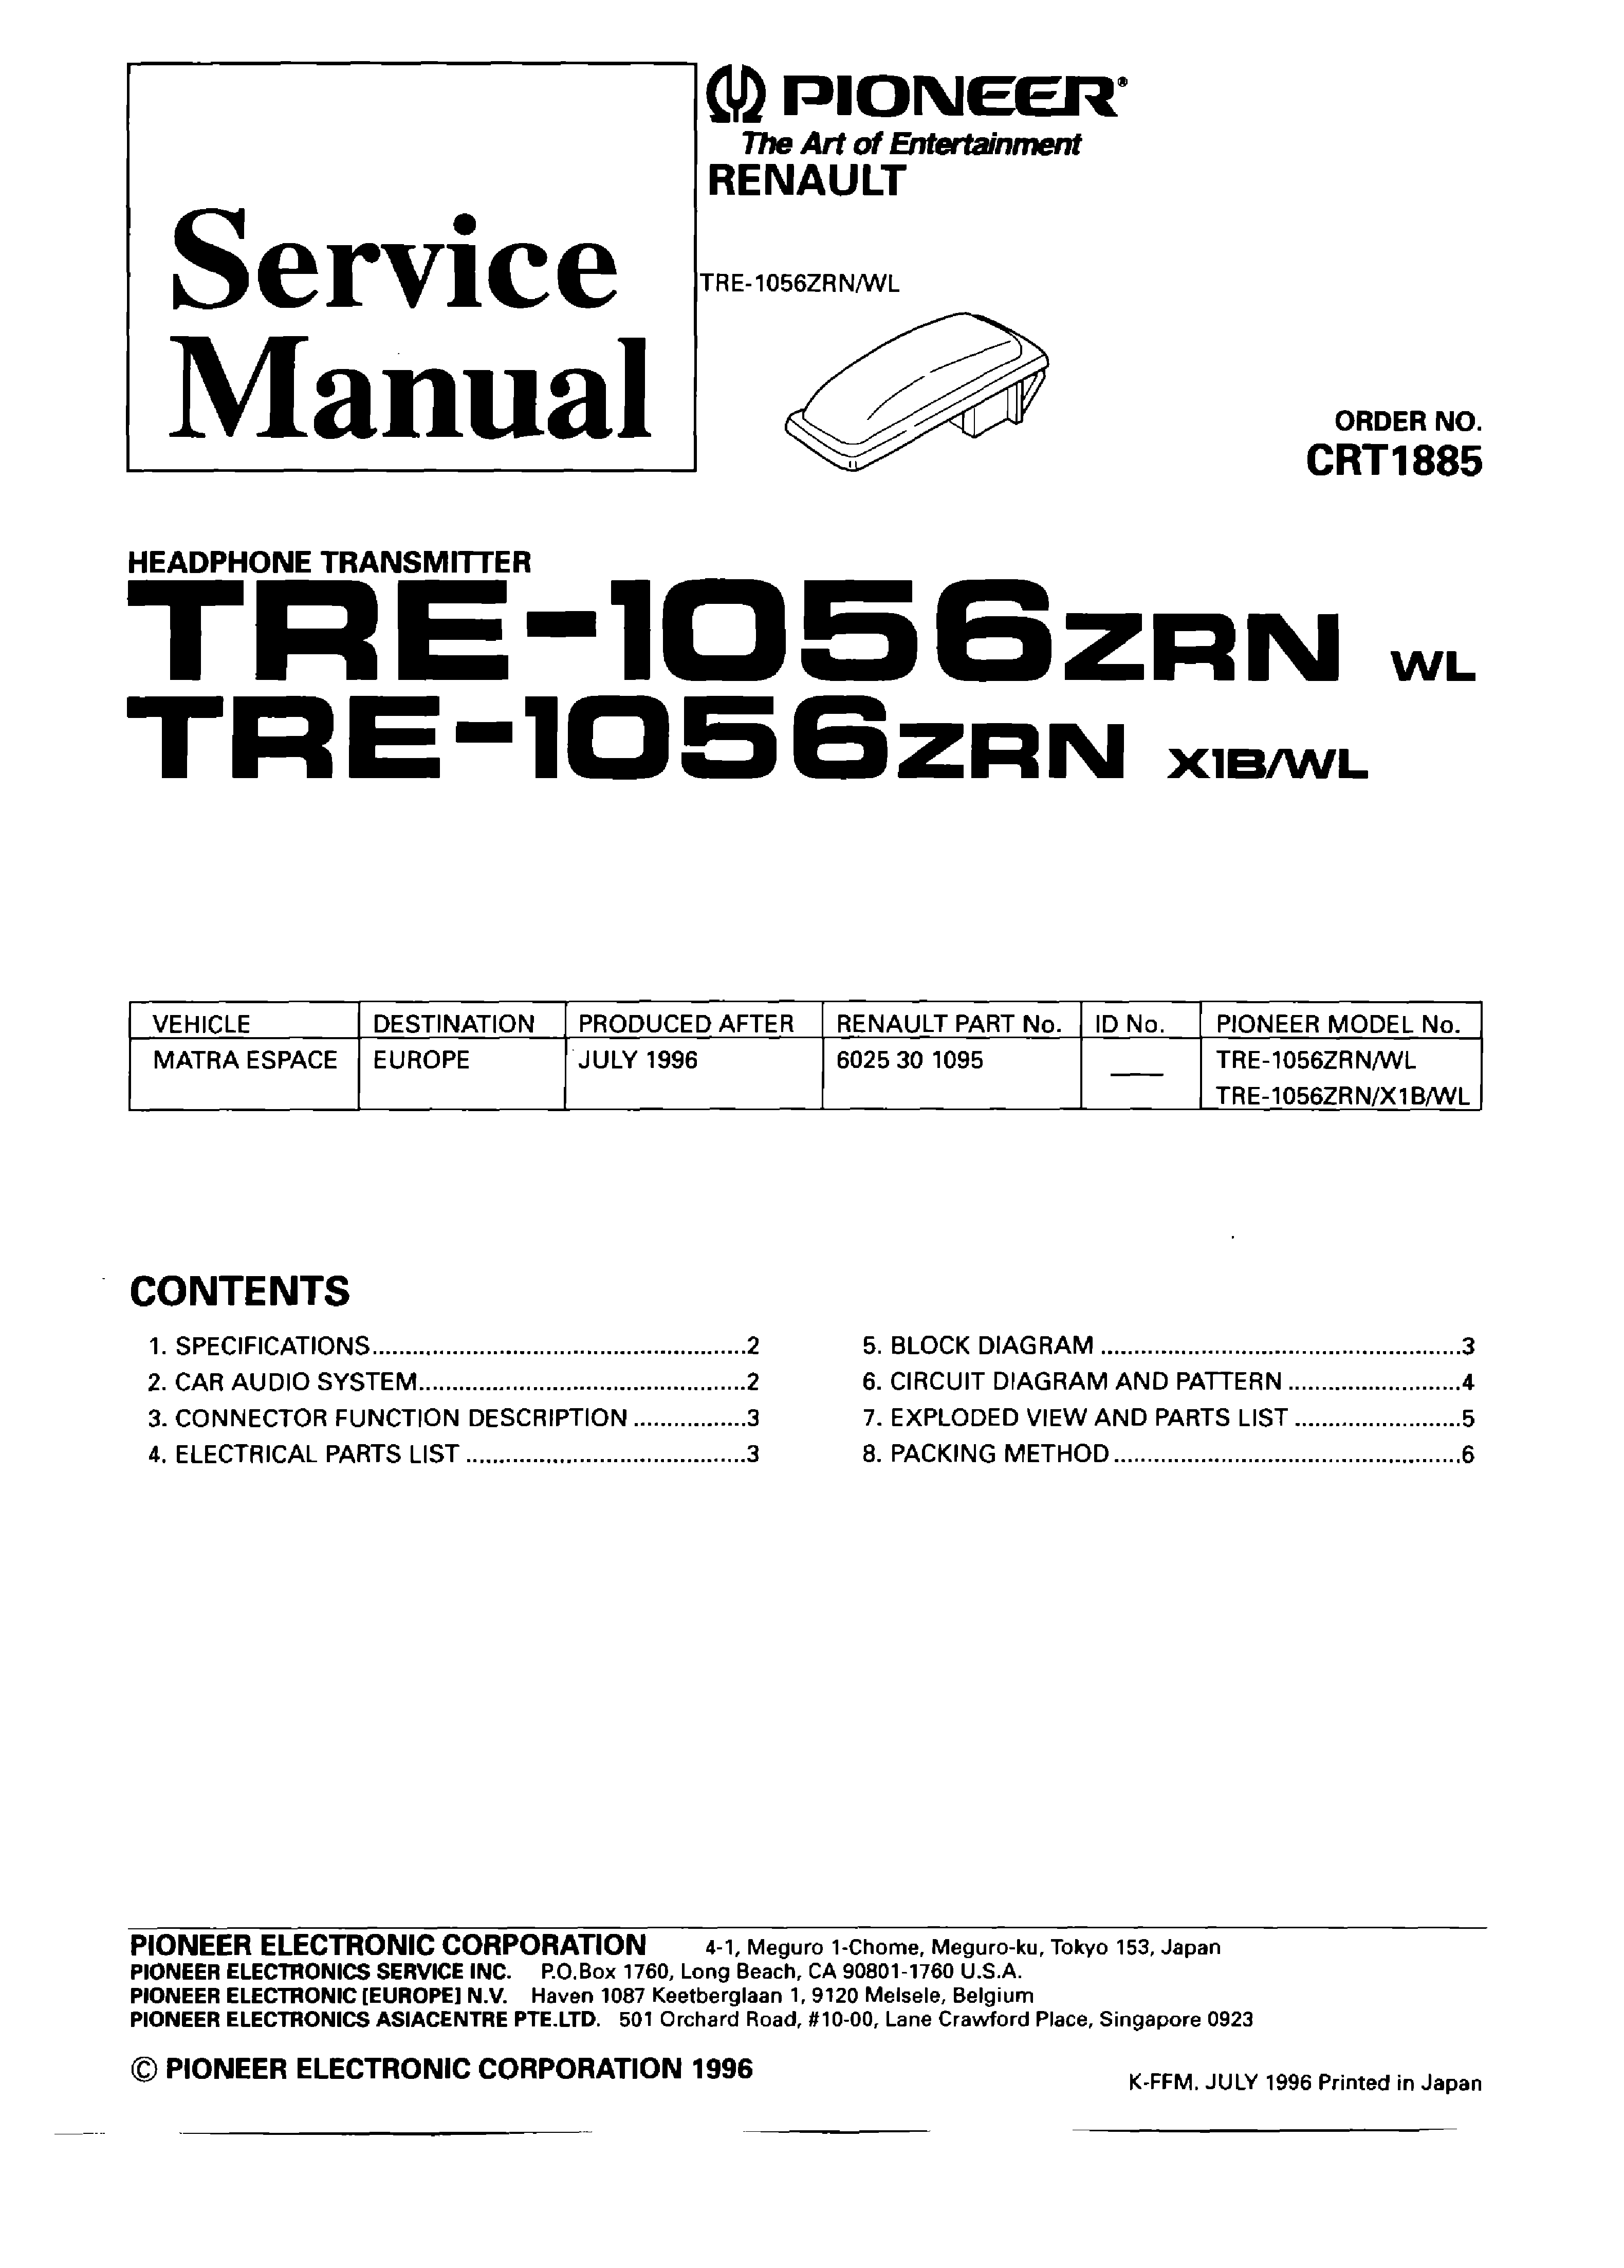 PIONEER TRE-1056ZRN CRT1885 RENAULT service manual (1st page)